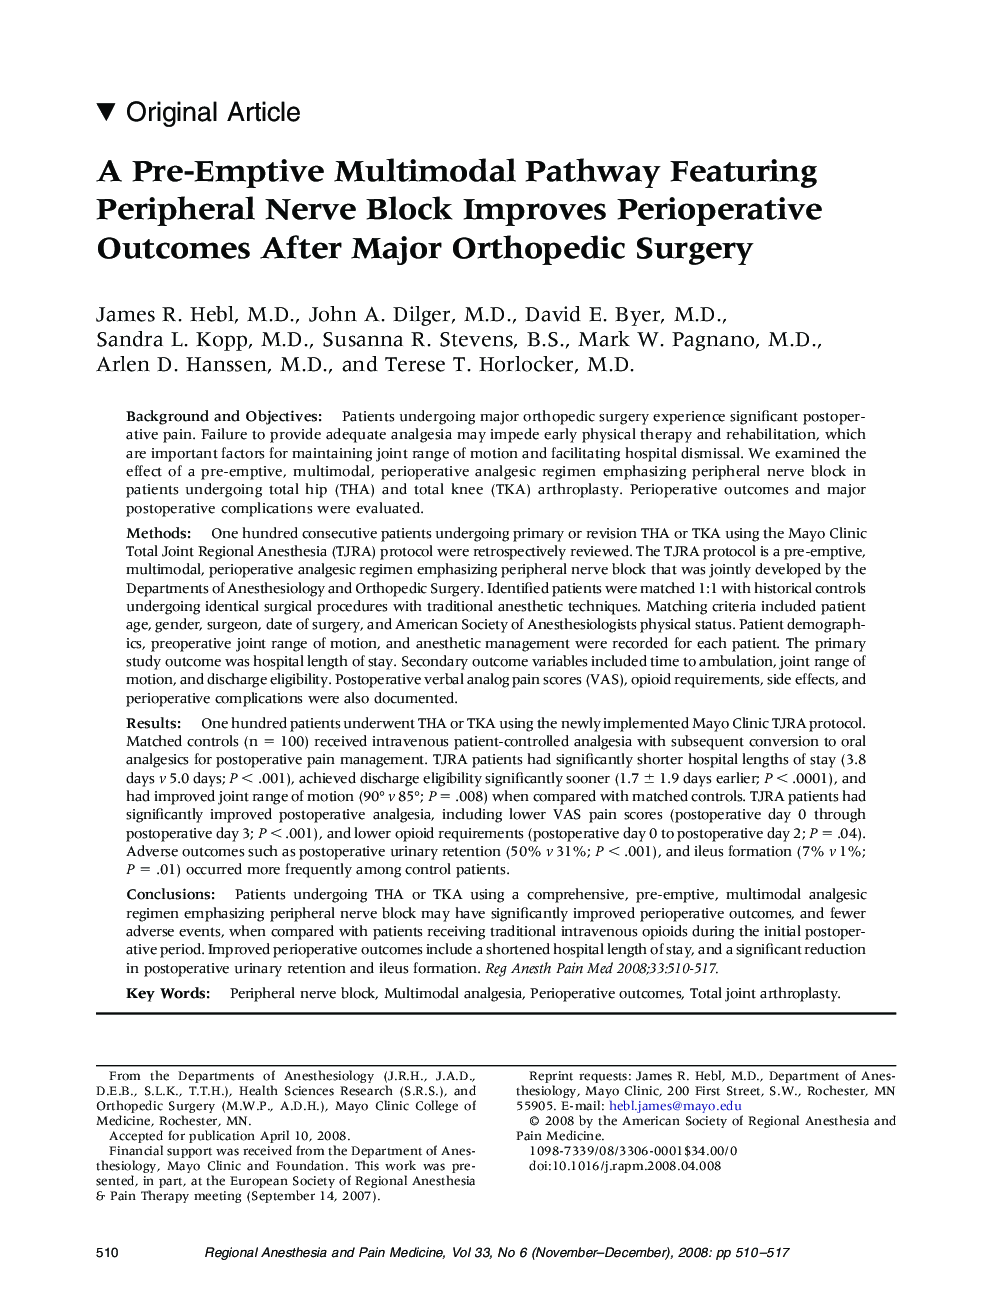 A Pre-Emptive Multimodal Pathway Featuring Peripheral Nerve Block Improves Perioperative Outcomes After Major Orthopedic Surgery